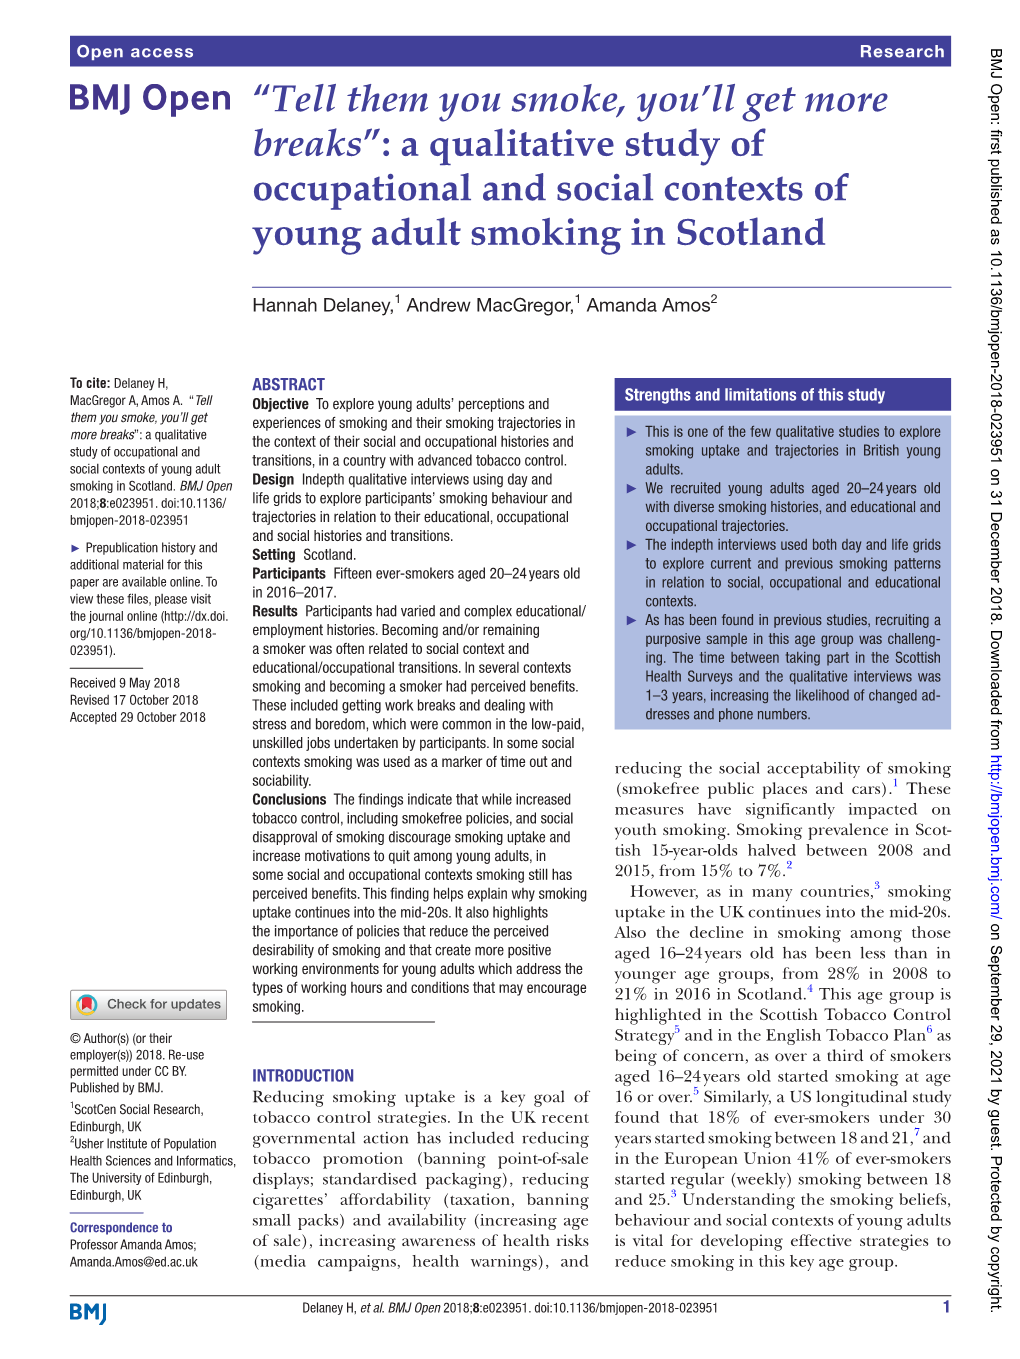 A Qualitative Study of Occupational and Social Contexts of Young Adult Smoking in Scotland